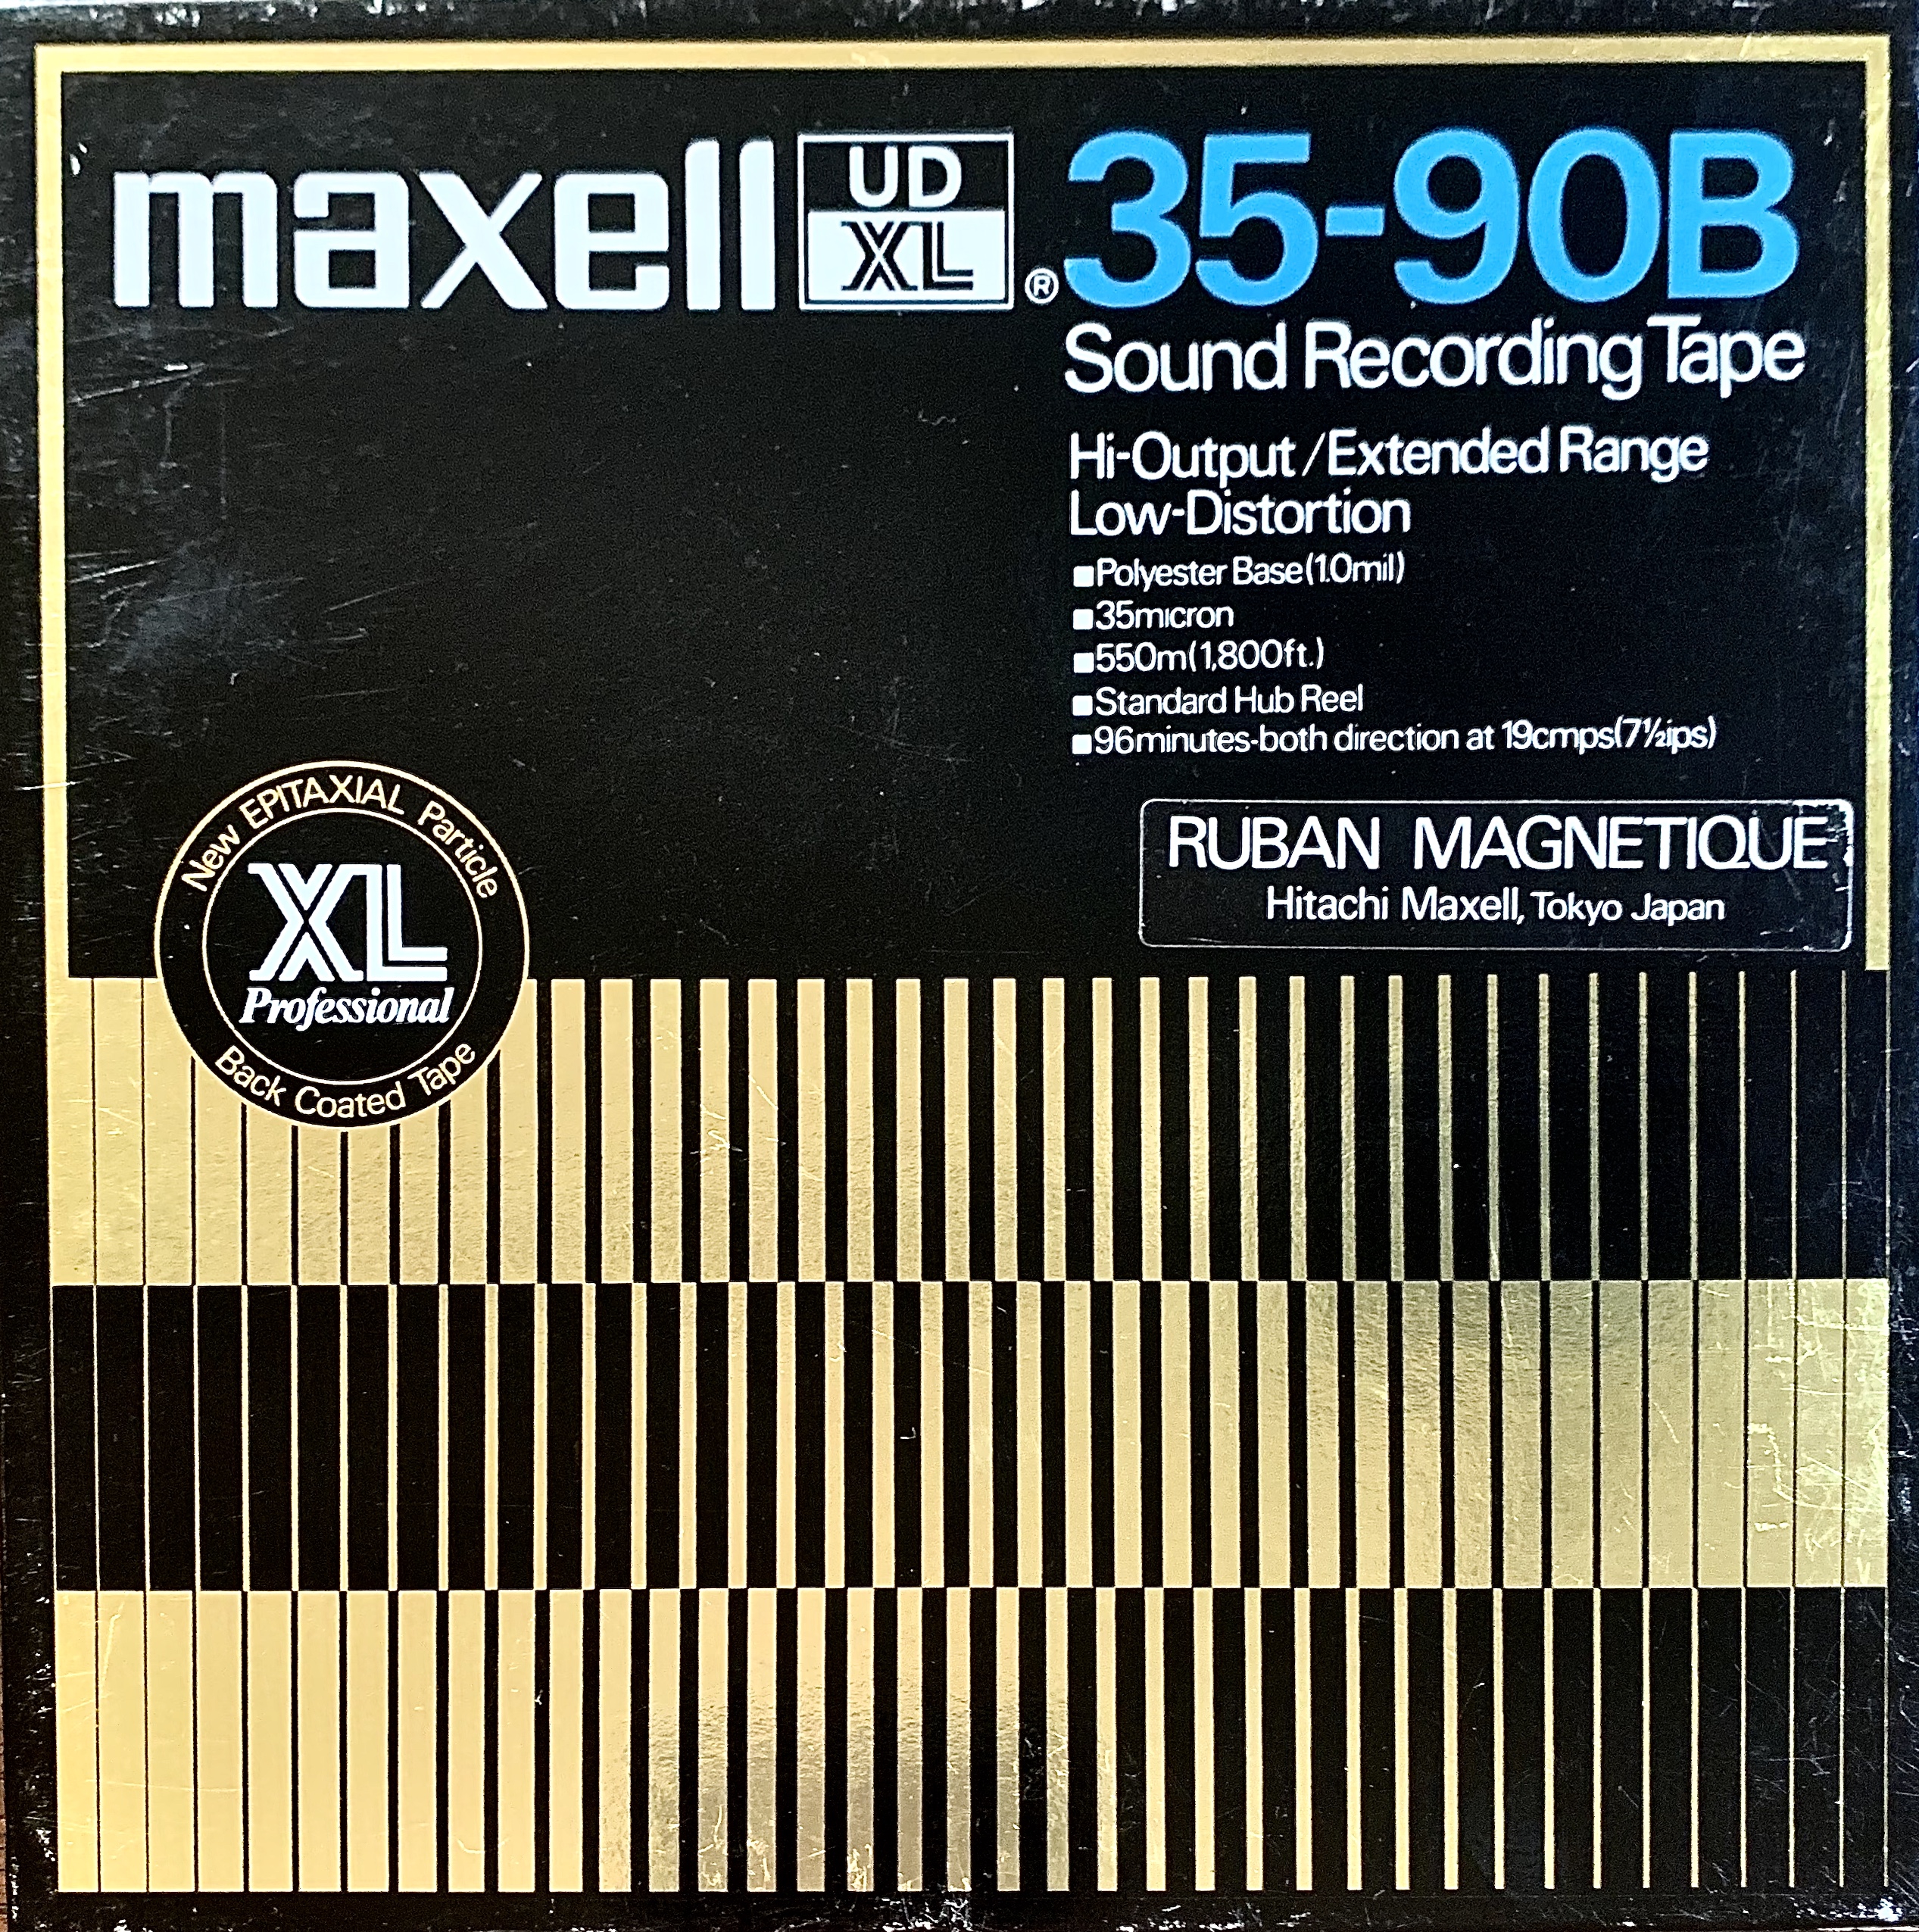 NOS MAXELL UD/XL 35-90B 7 SOUND RECORDING TAPE - electronics - by owner -  sale - craigslist